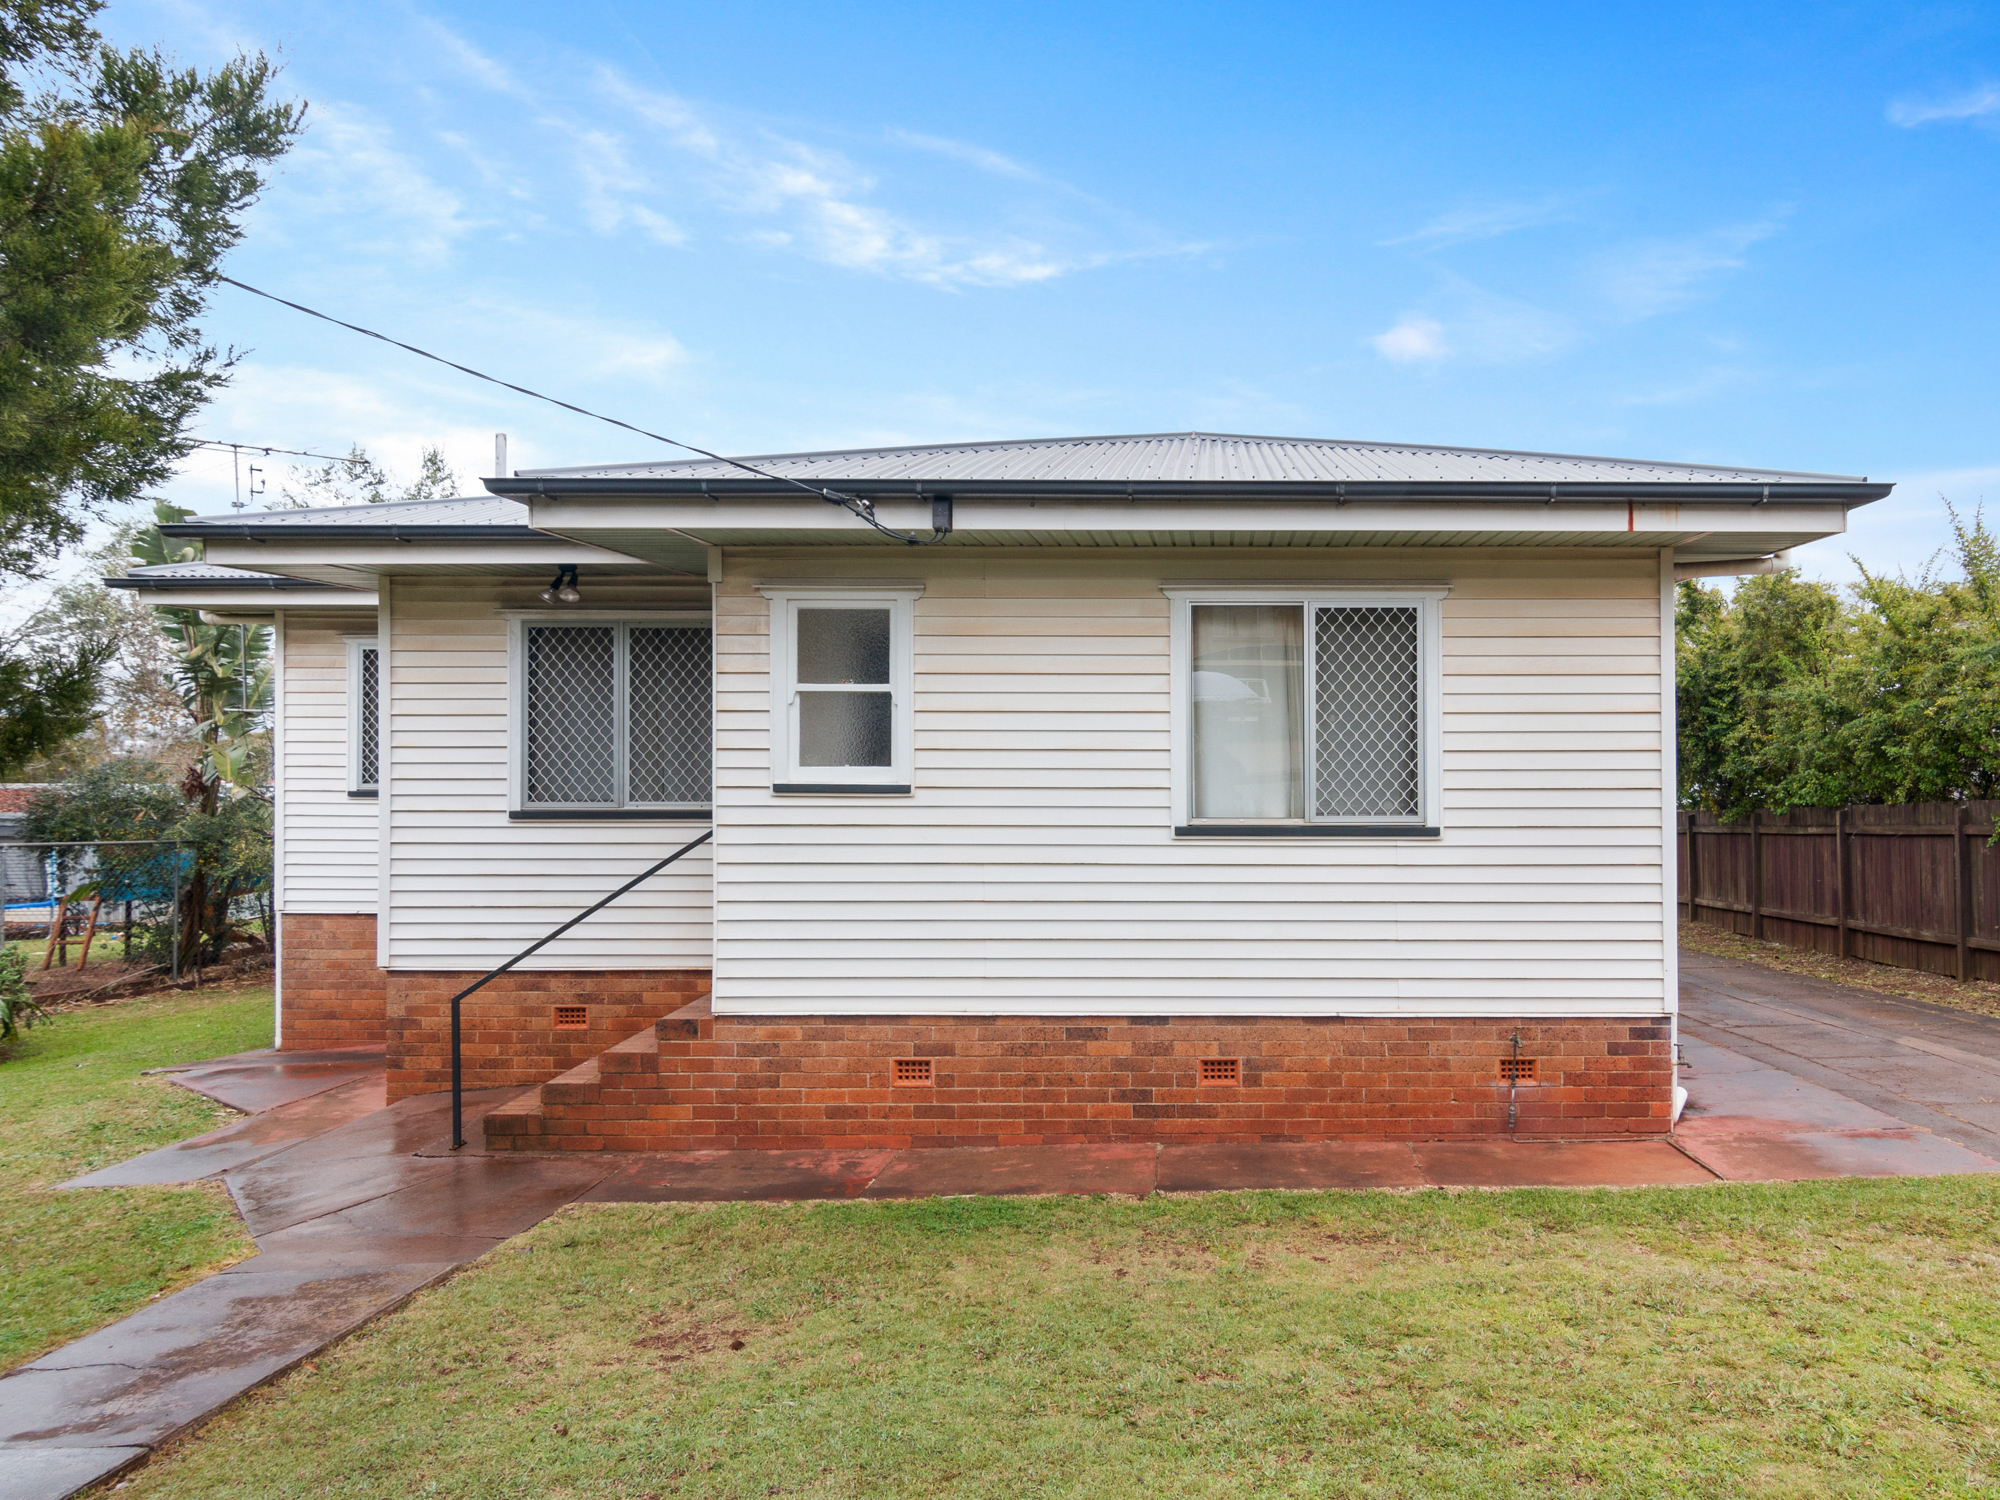 25 Rowbotham Street, Rangeville QLD 4350 - House For Rent - Homely